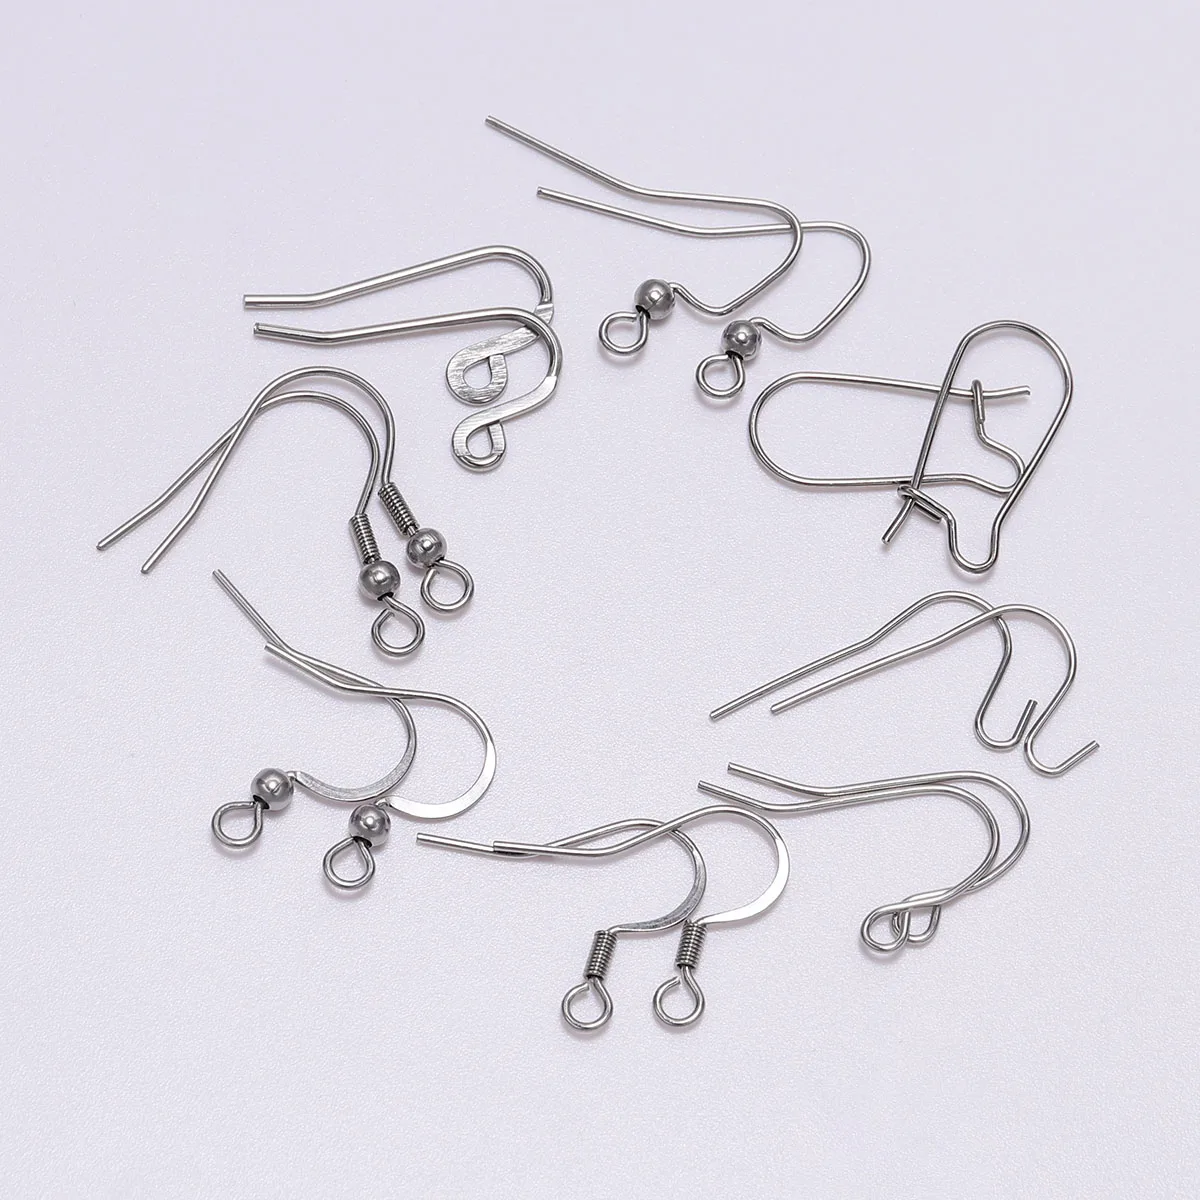 

50pcs/lot 8 Shapes Stainless Steel Ear Hook Clasps Hooks Earring Findings Earwire For Jewelry Making Craft Supplies Accessories